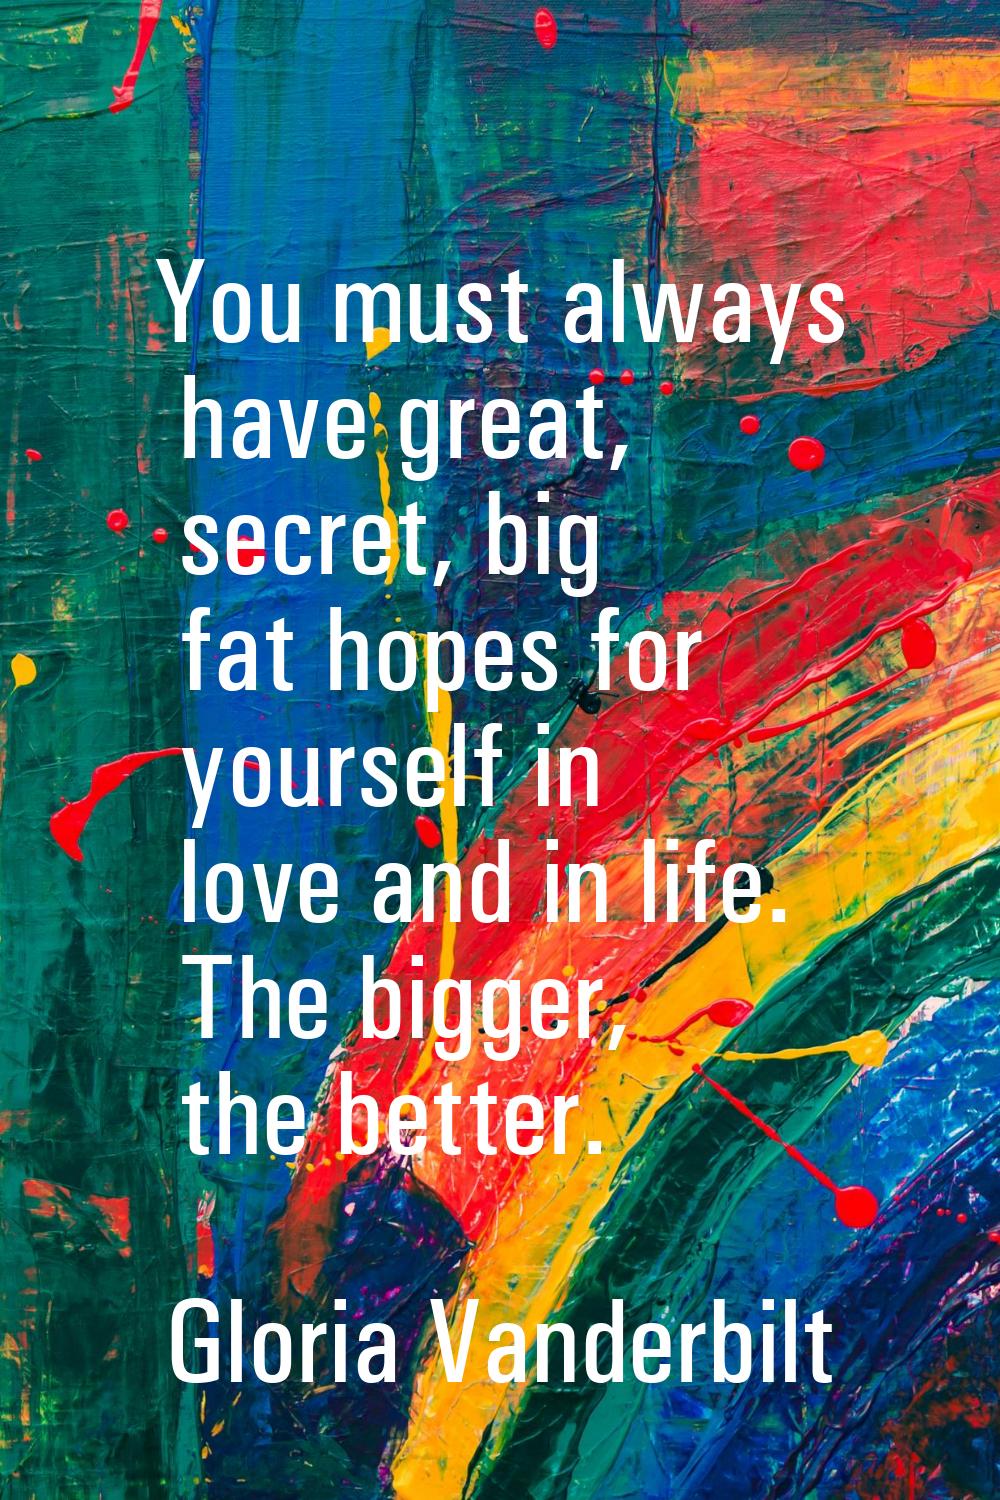 You must always have great, secret, big fat hopes for yourself in love and in life. The bigger, the